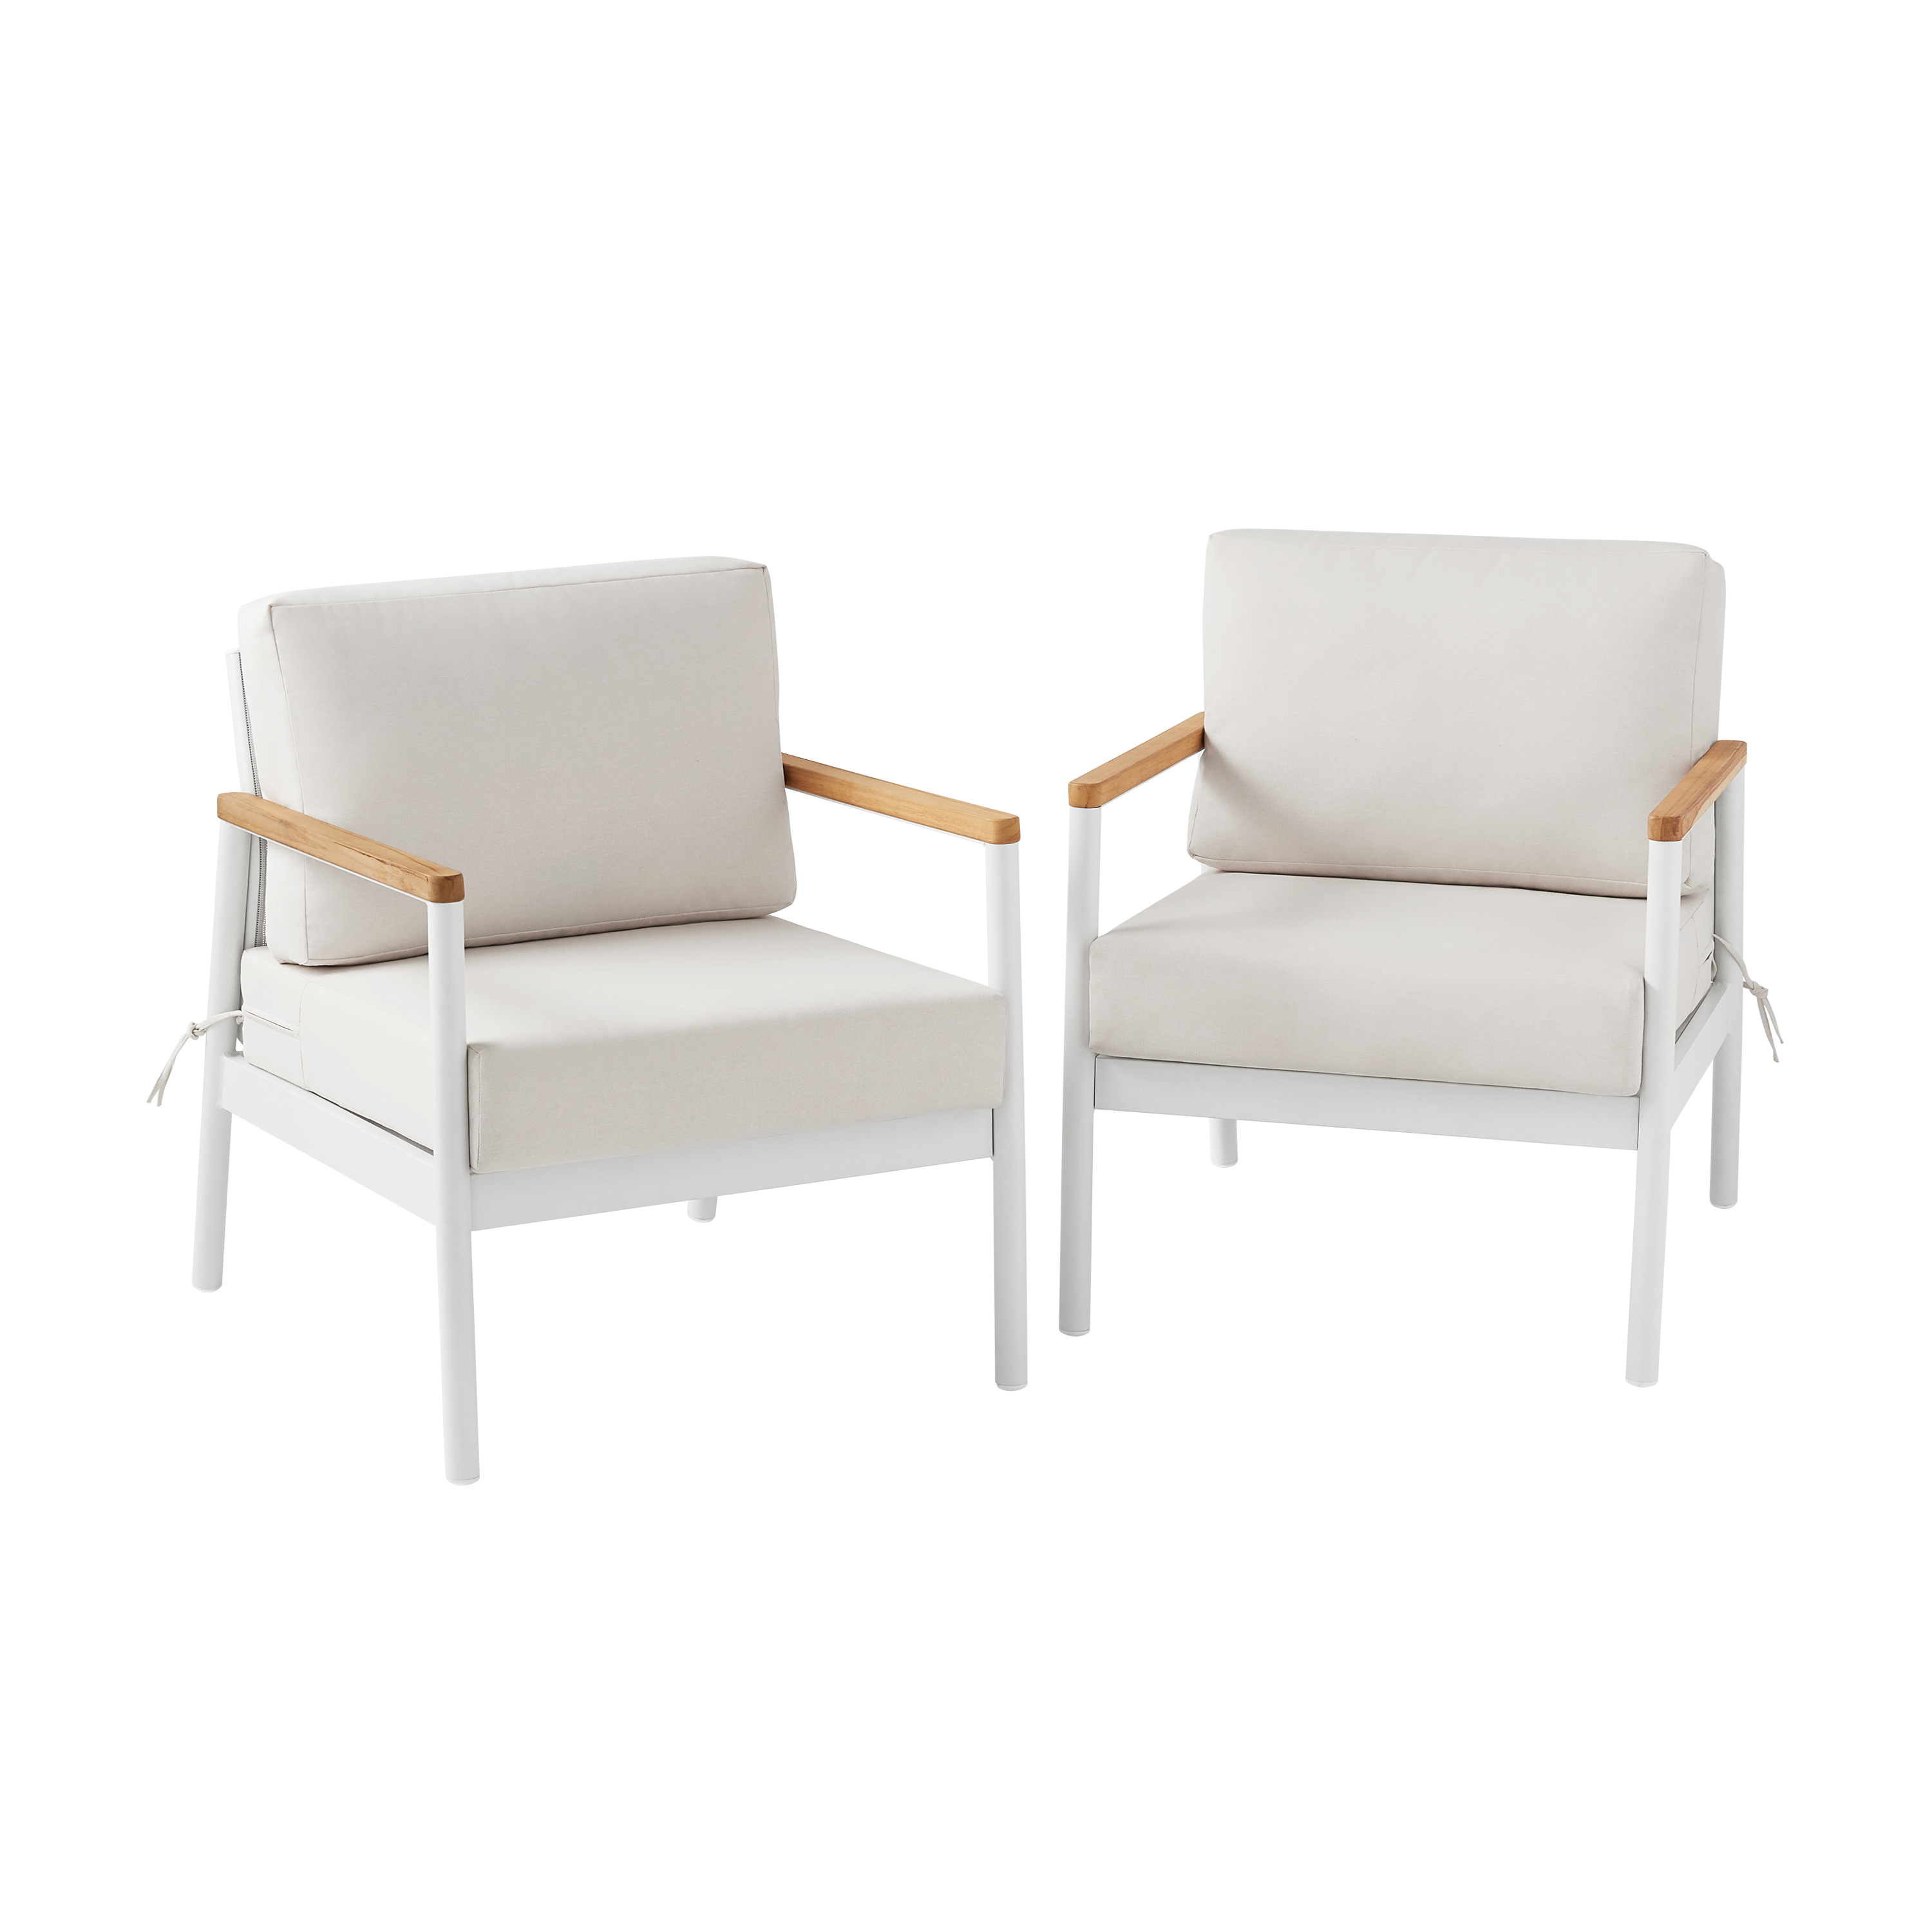 Better Homes & Gardens Wellsley 2-Piece Aluminum Outdoor Lounge Chairs Set by Dave & Jenny Marrs - image 1 of 9